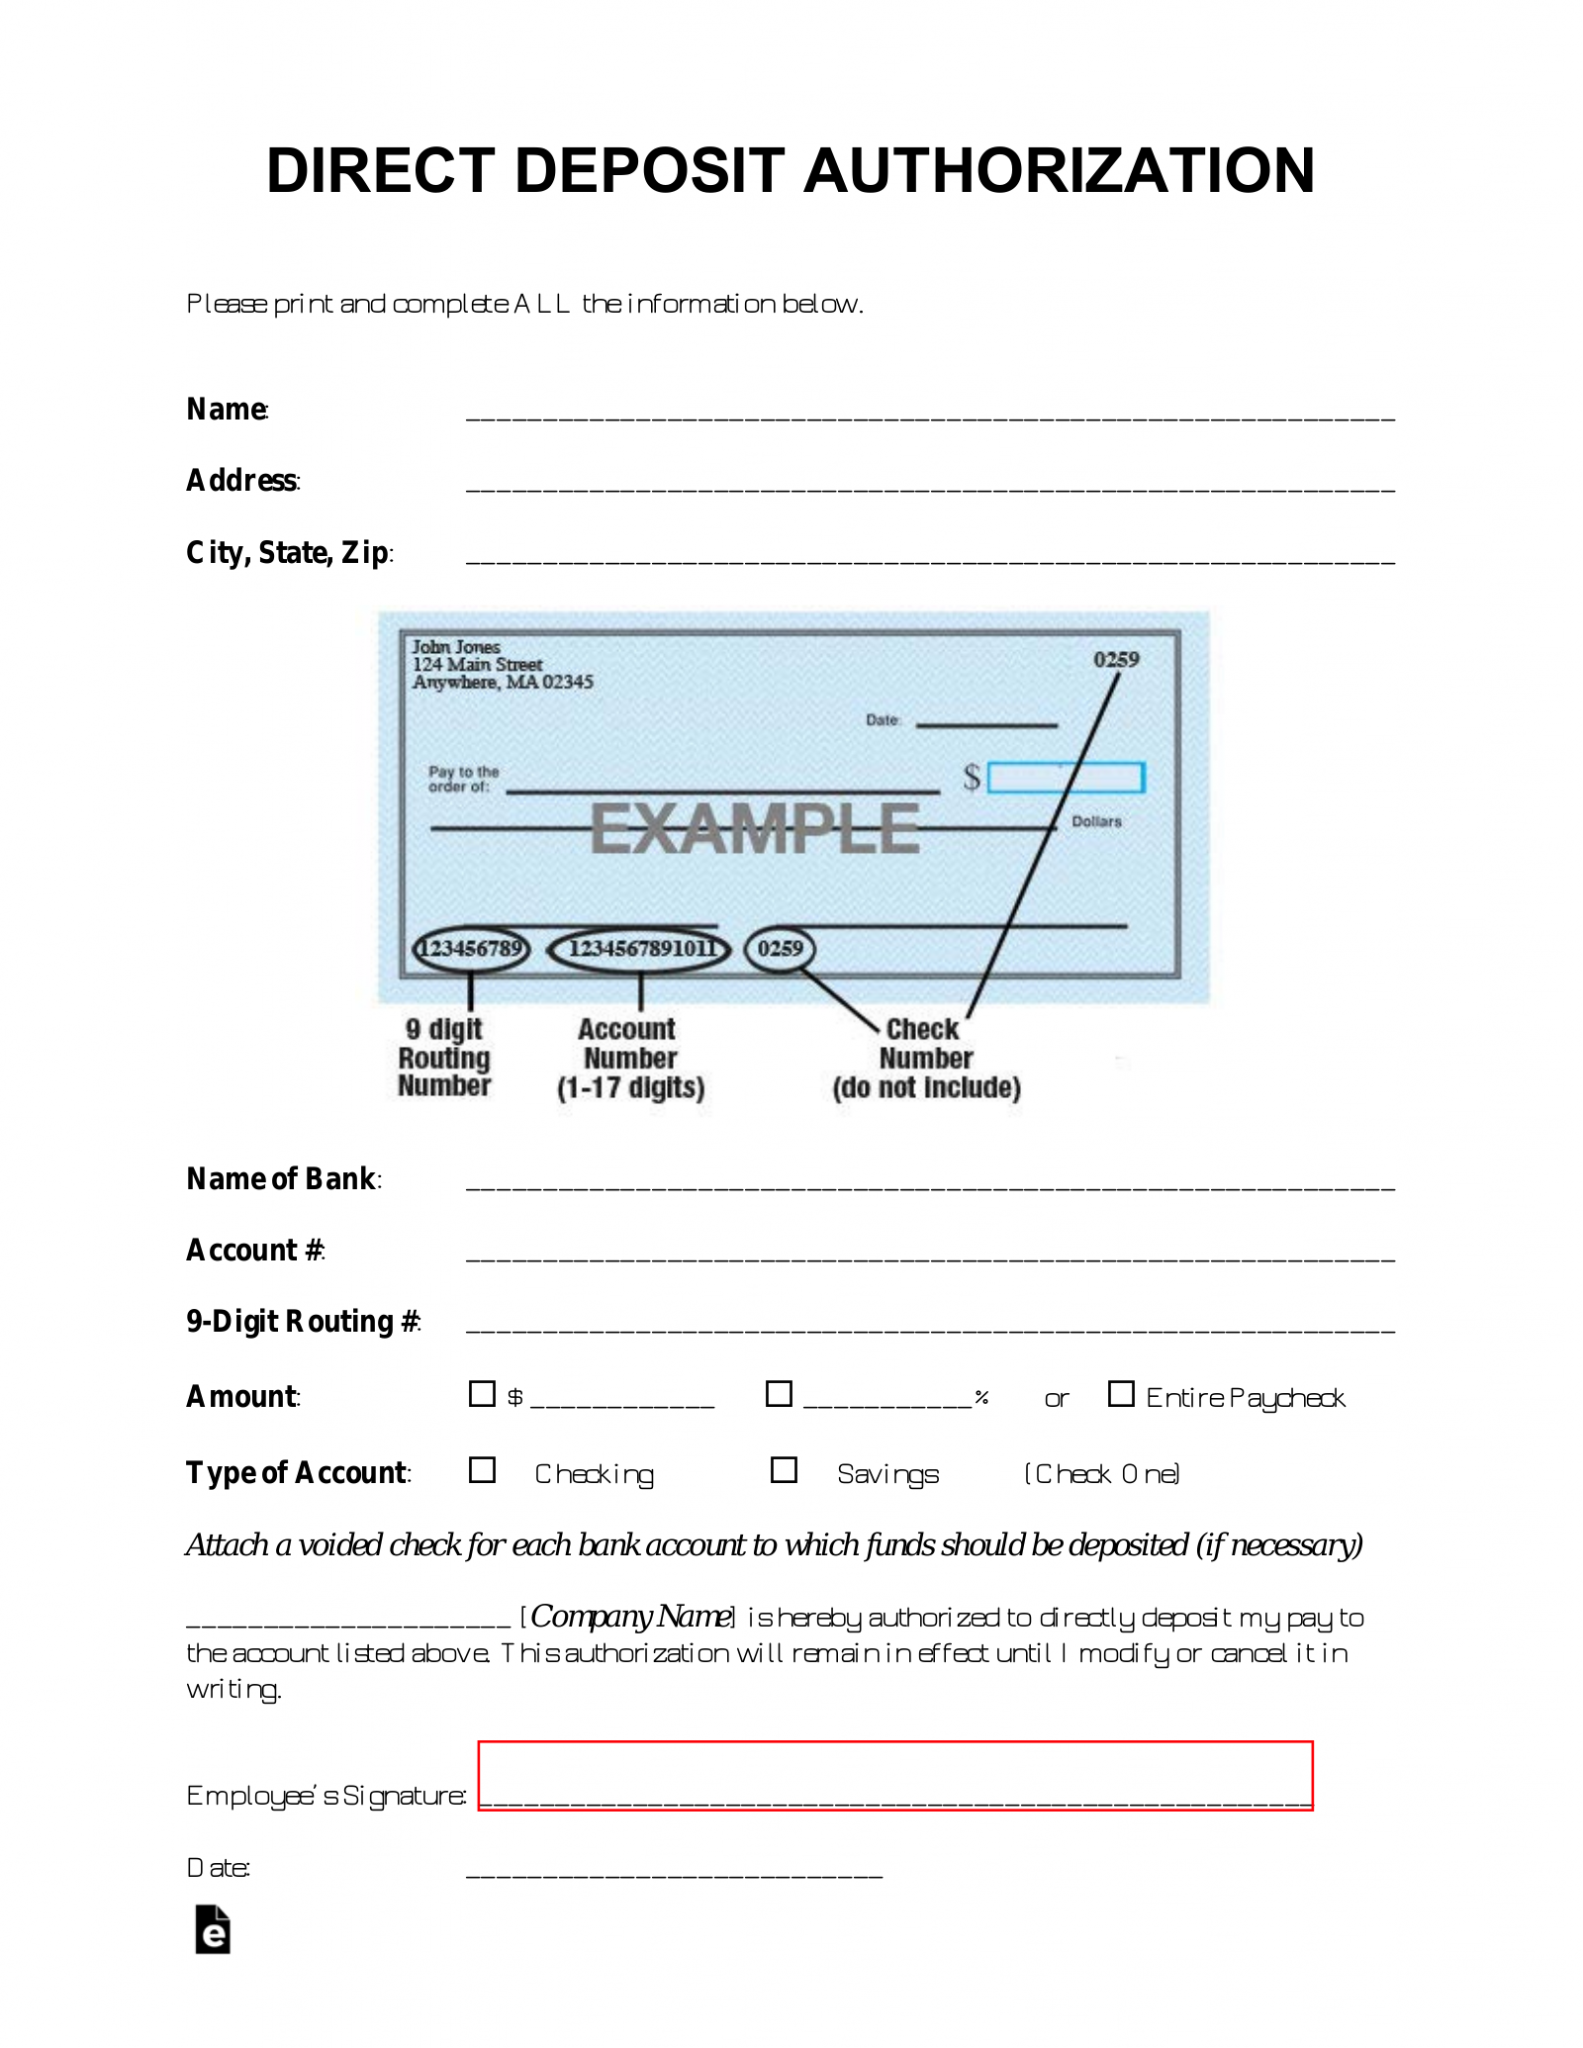 complete-fillable-sample-direct-deposit-forms-forms-and-document-my